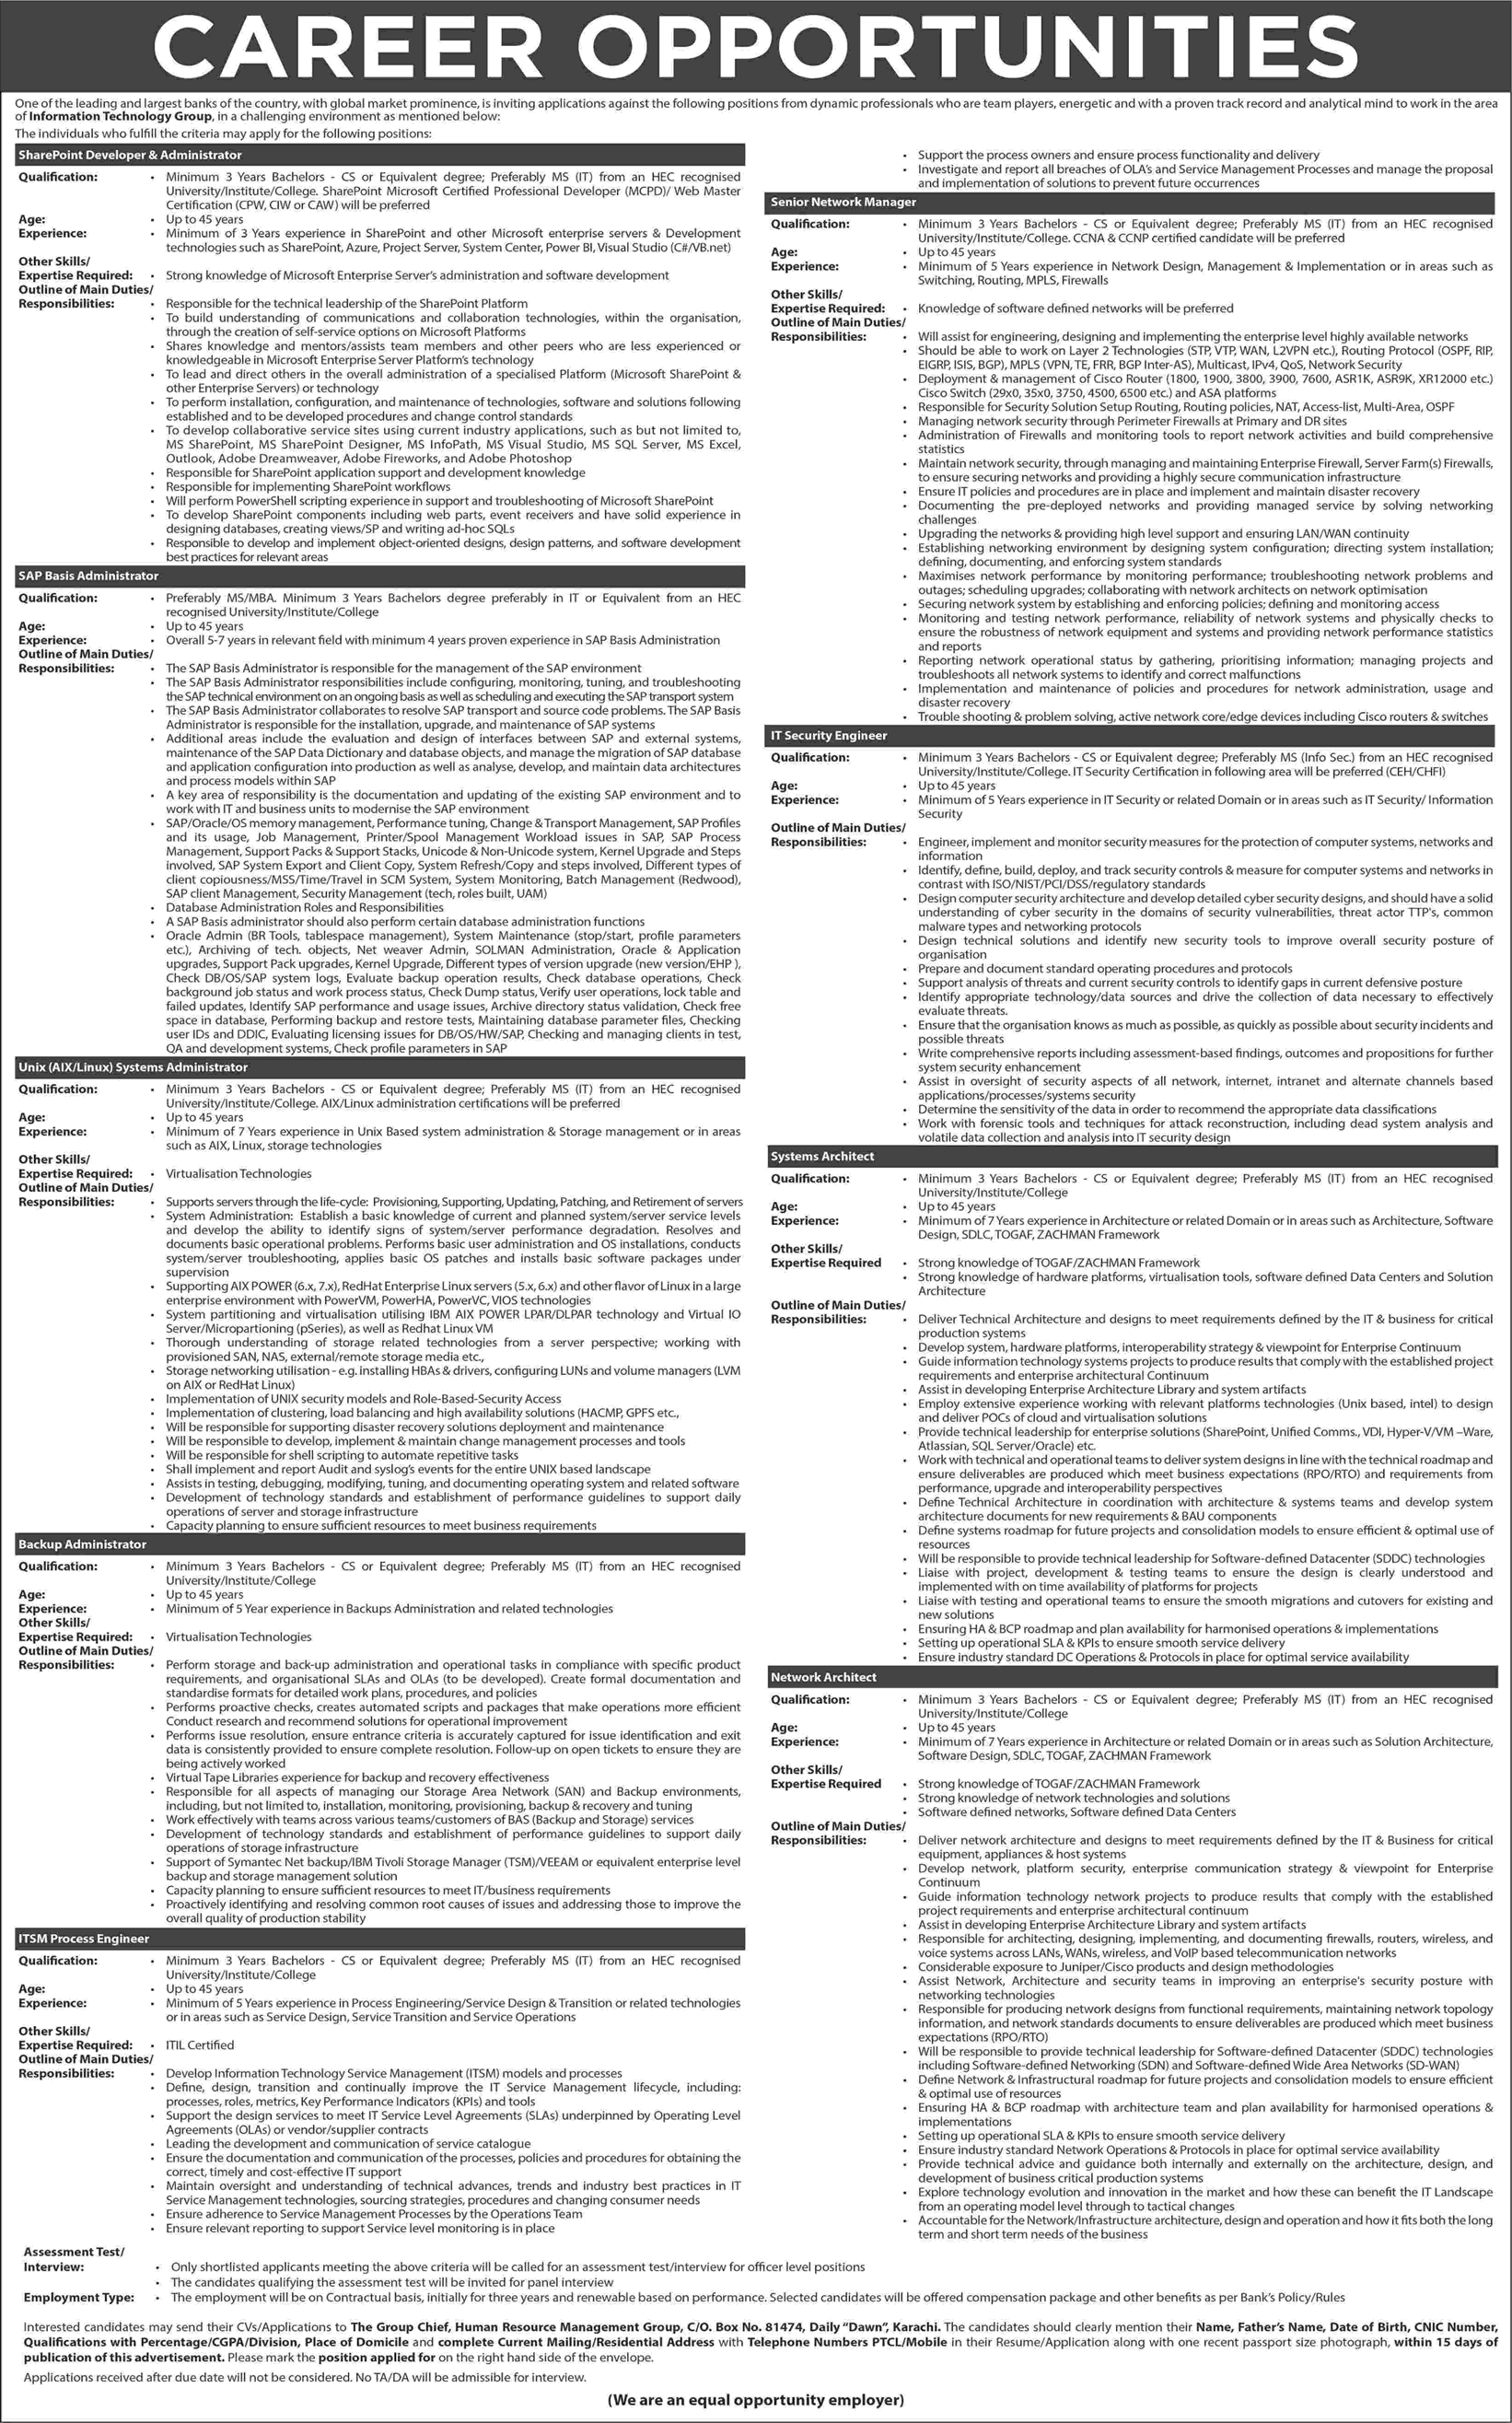 Bank Jobs in Pakistan November 2017 Software Engineers, System / Network Architects & Others Latest